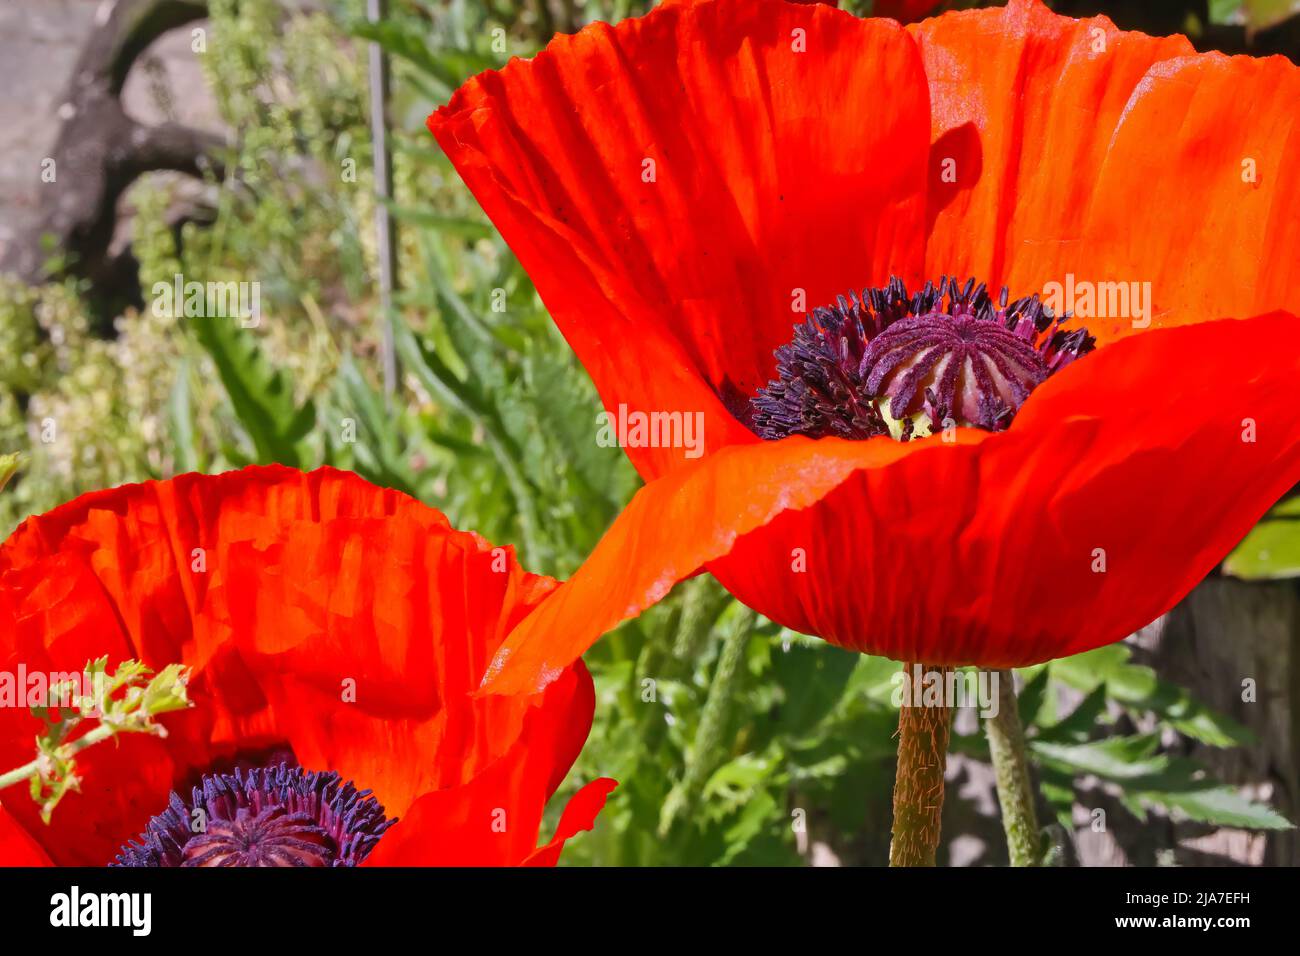 Closeup of 2 shiny bright red oriental poppies flowers (papaver orientale) in german garden Stock Photo